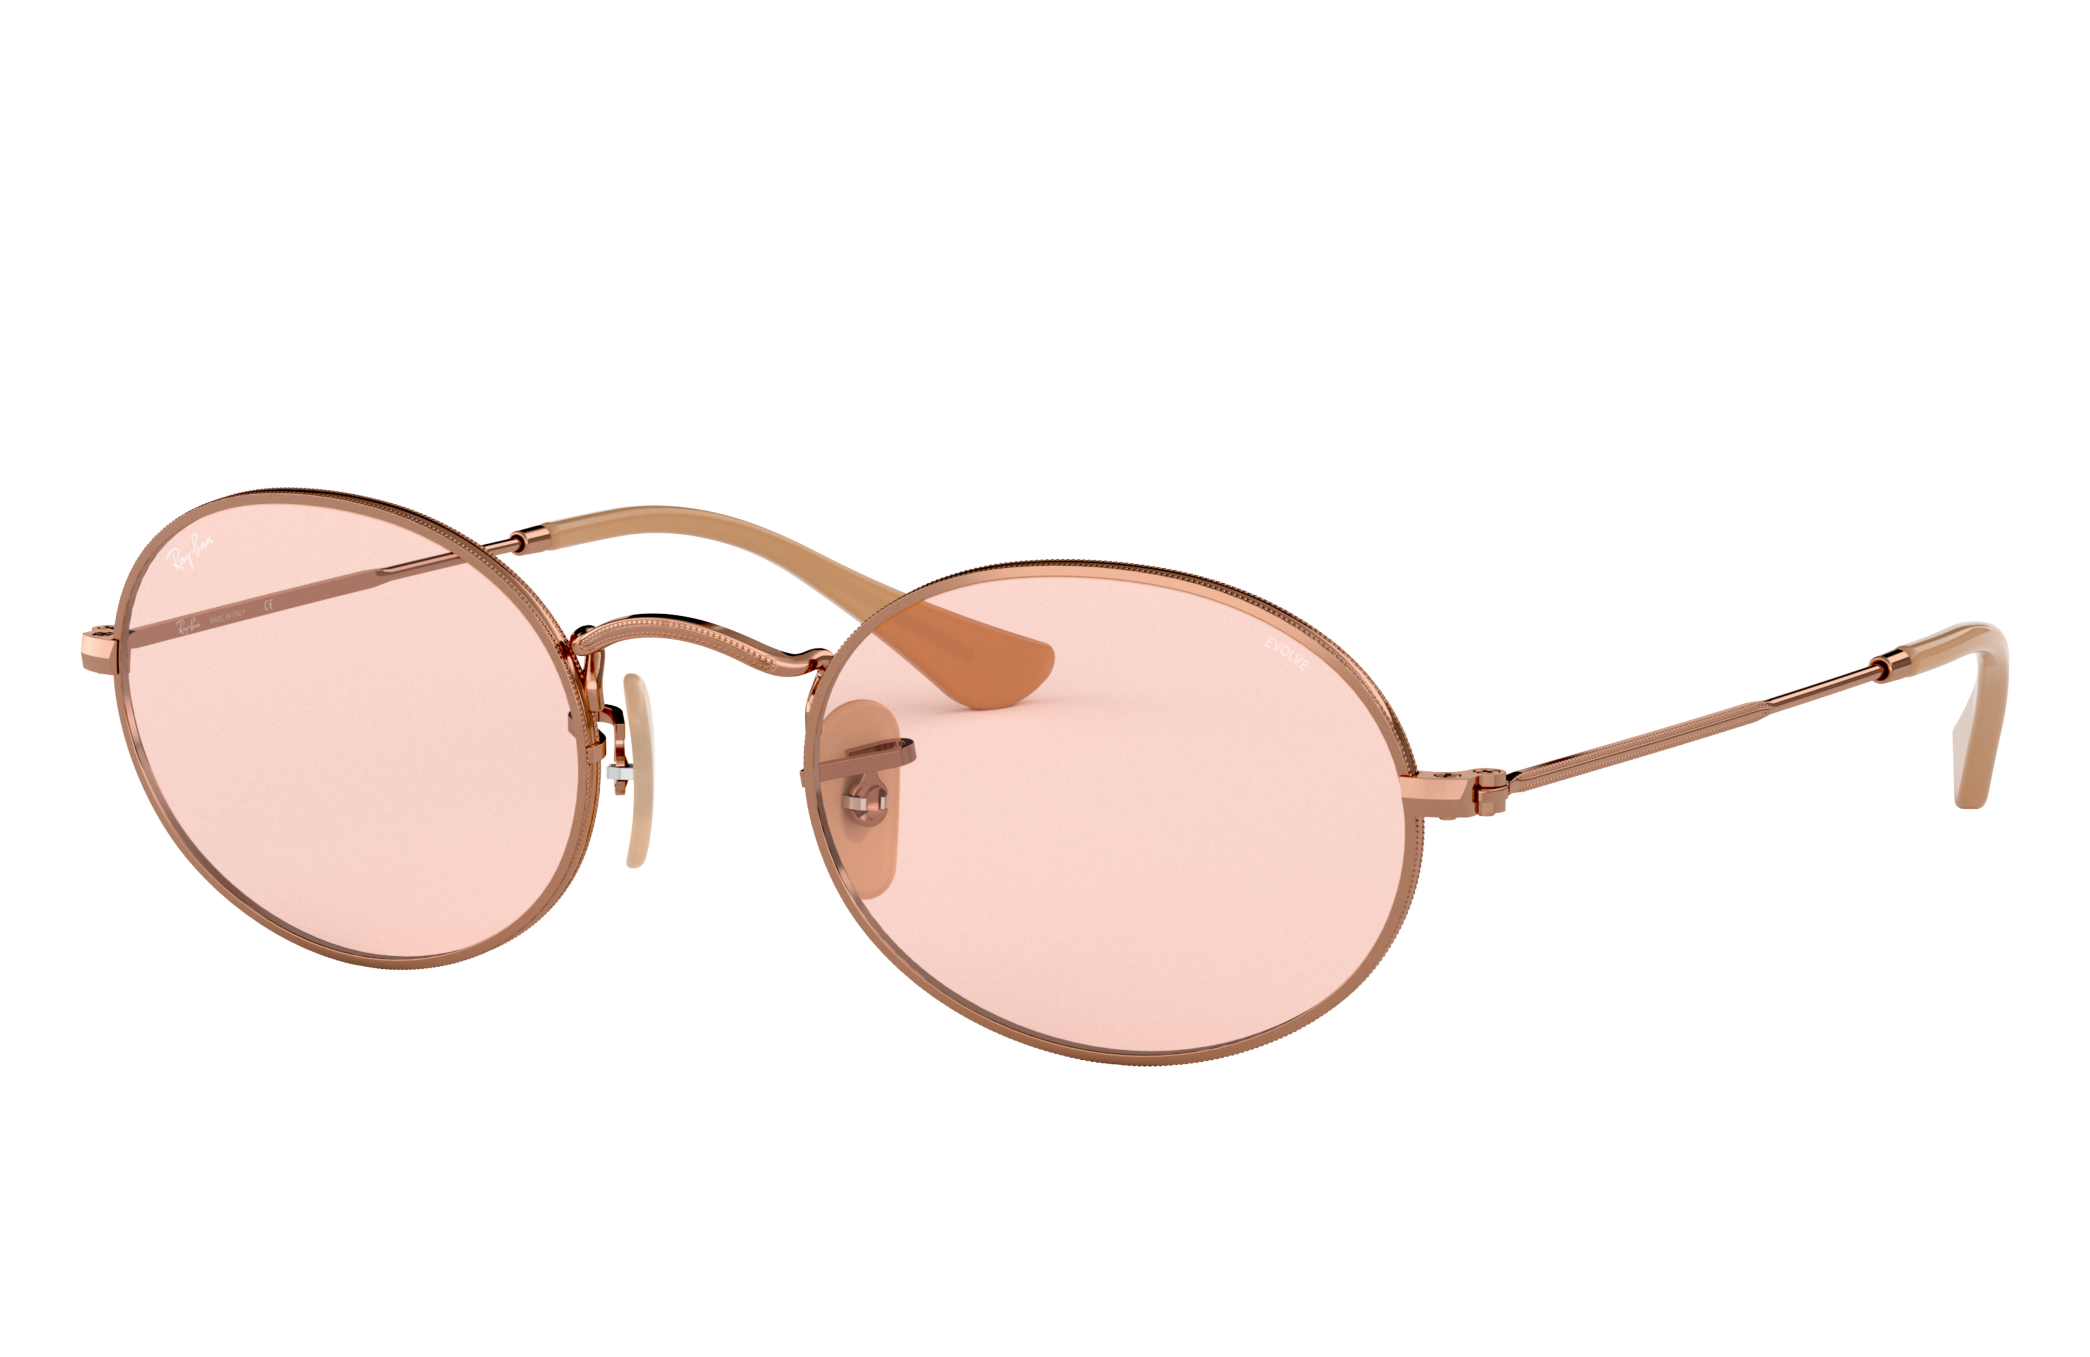 Oval Washed Evolve Sunglasses in Copper and Pink Photochromic | Ray-Ban®